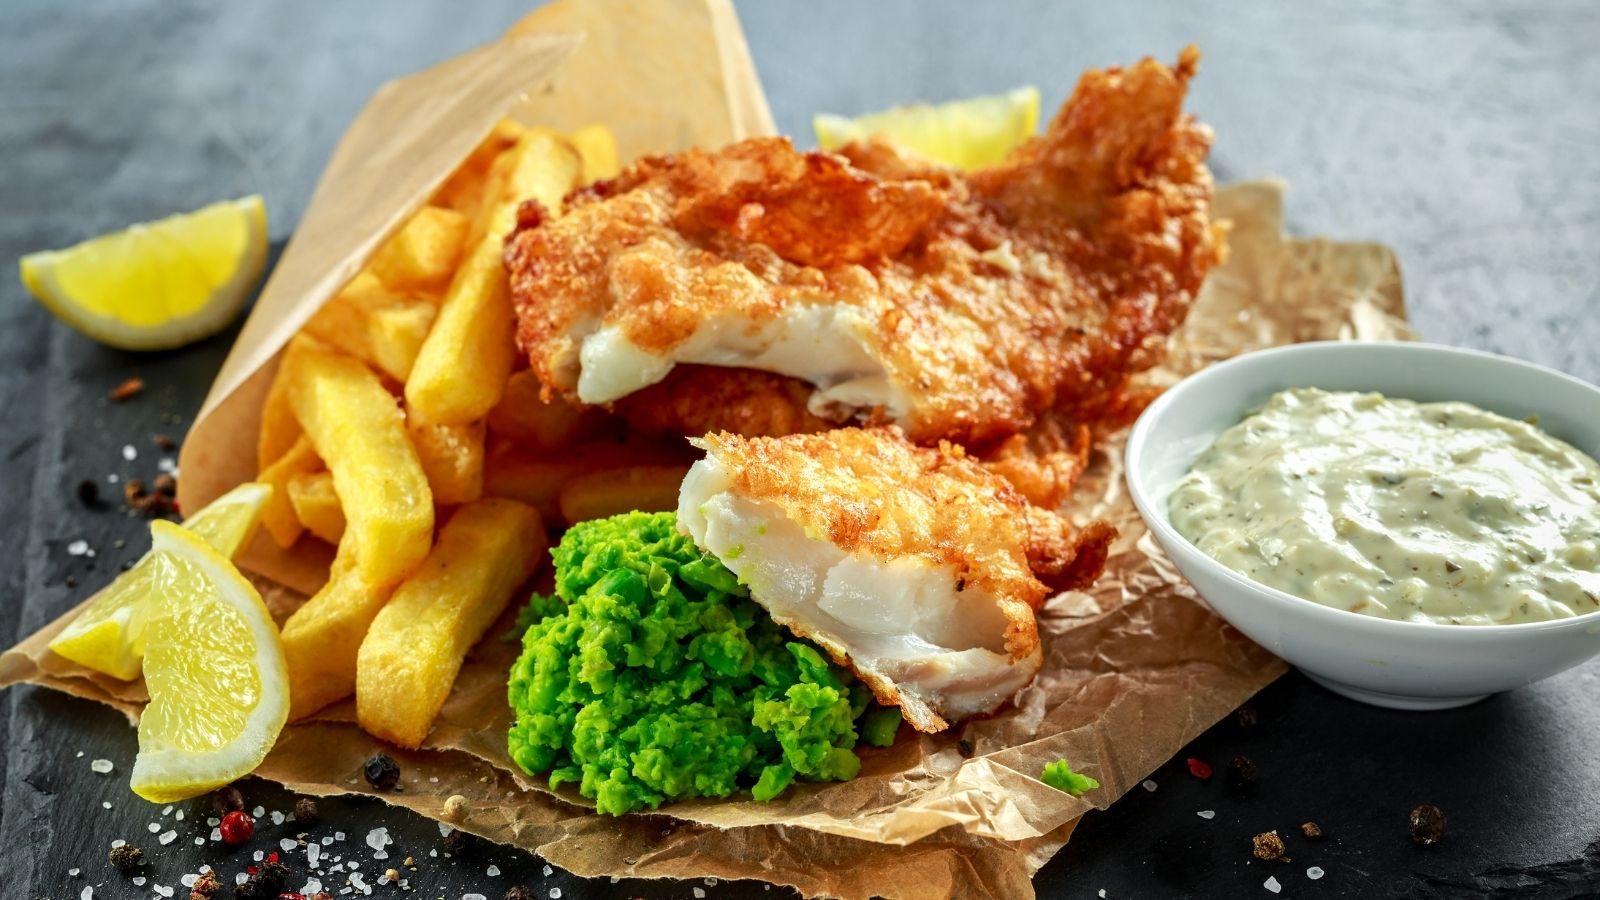 The 17 best places to get fish and chips in Fife - chosen by our